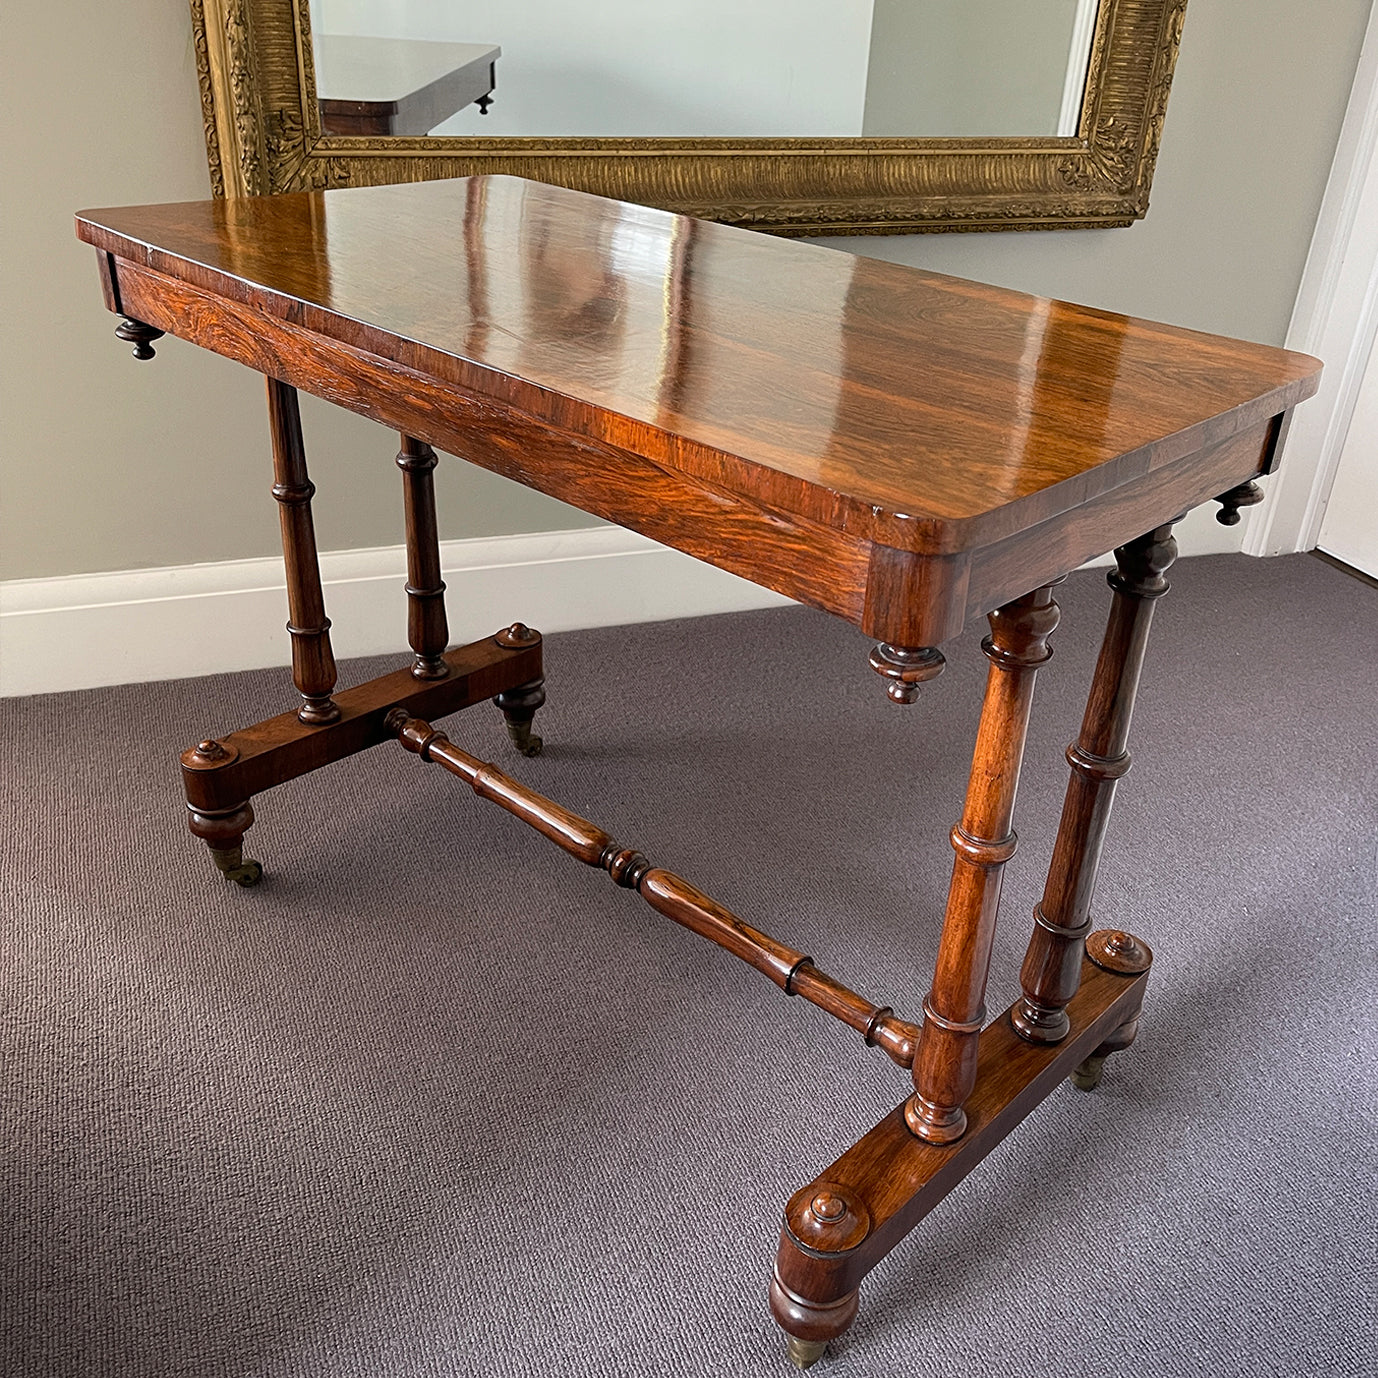 A mid Victorian rosewood stretcher base table with well figured rectangular top that sits upon turned legs and stretcher, raised on original brass castors. English. Superb condition. - SHOP NOW - www.intovintage.co.uk